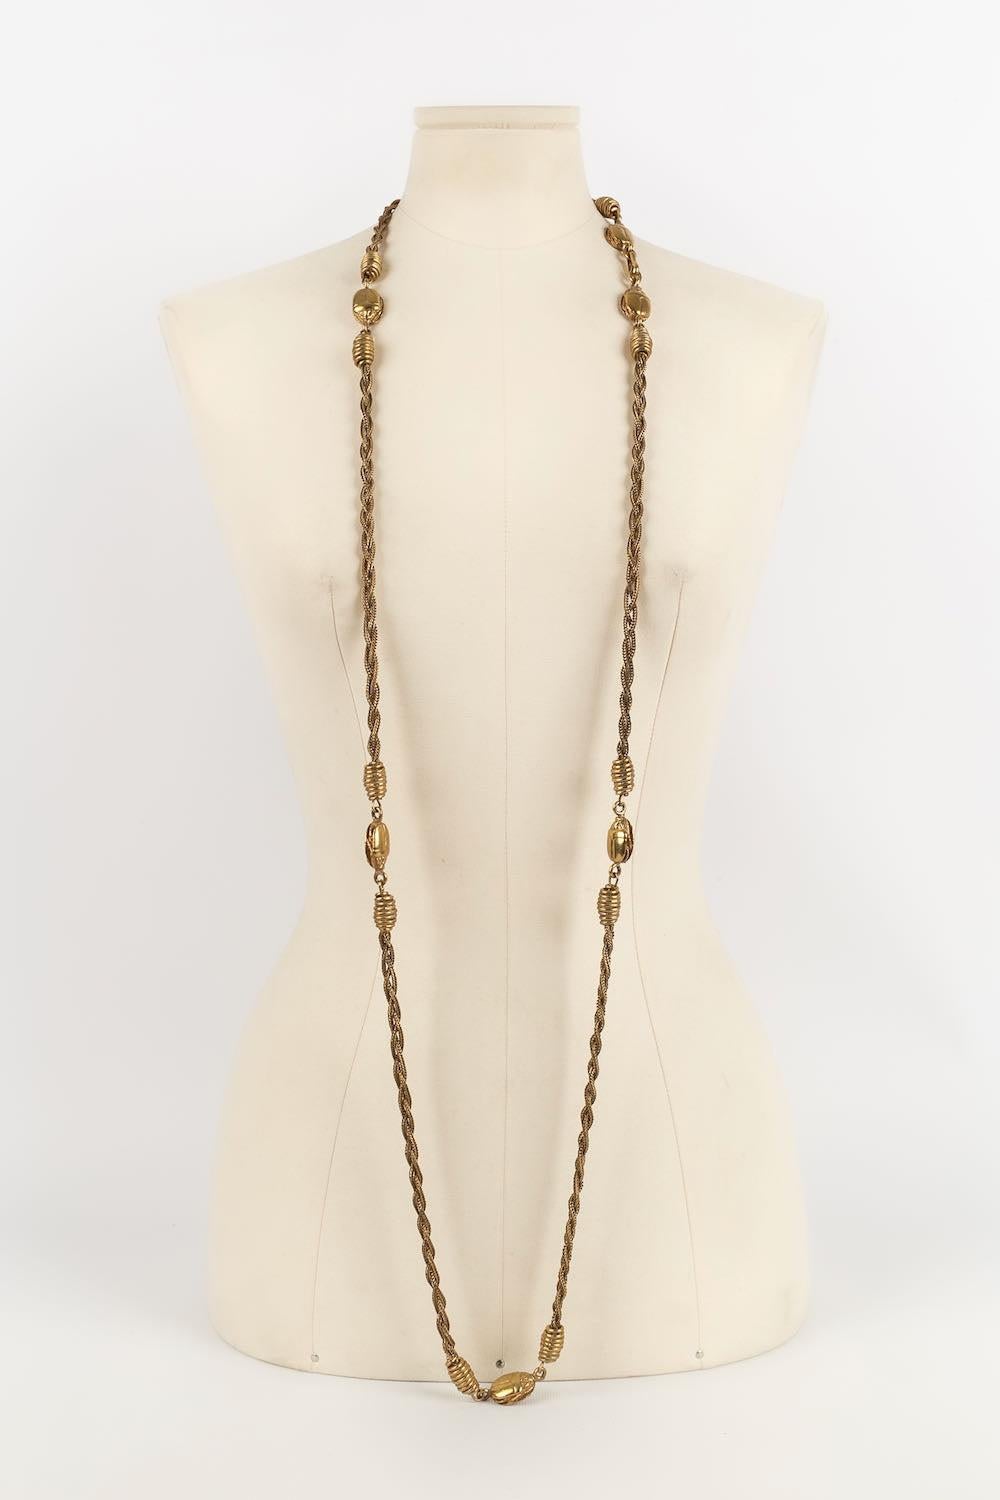 Chanel -Gold metal necklace featuring beetles.

Additional information: 
Dimensions: Length: 144 cm
Condition: Very good condition
Seller Ref number: CB71